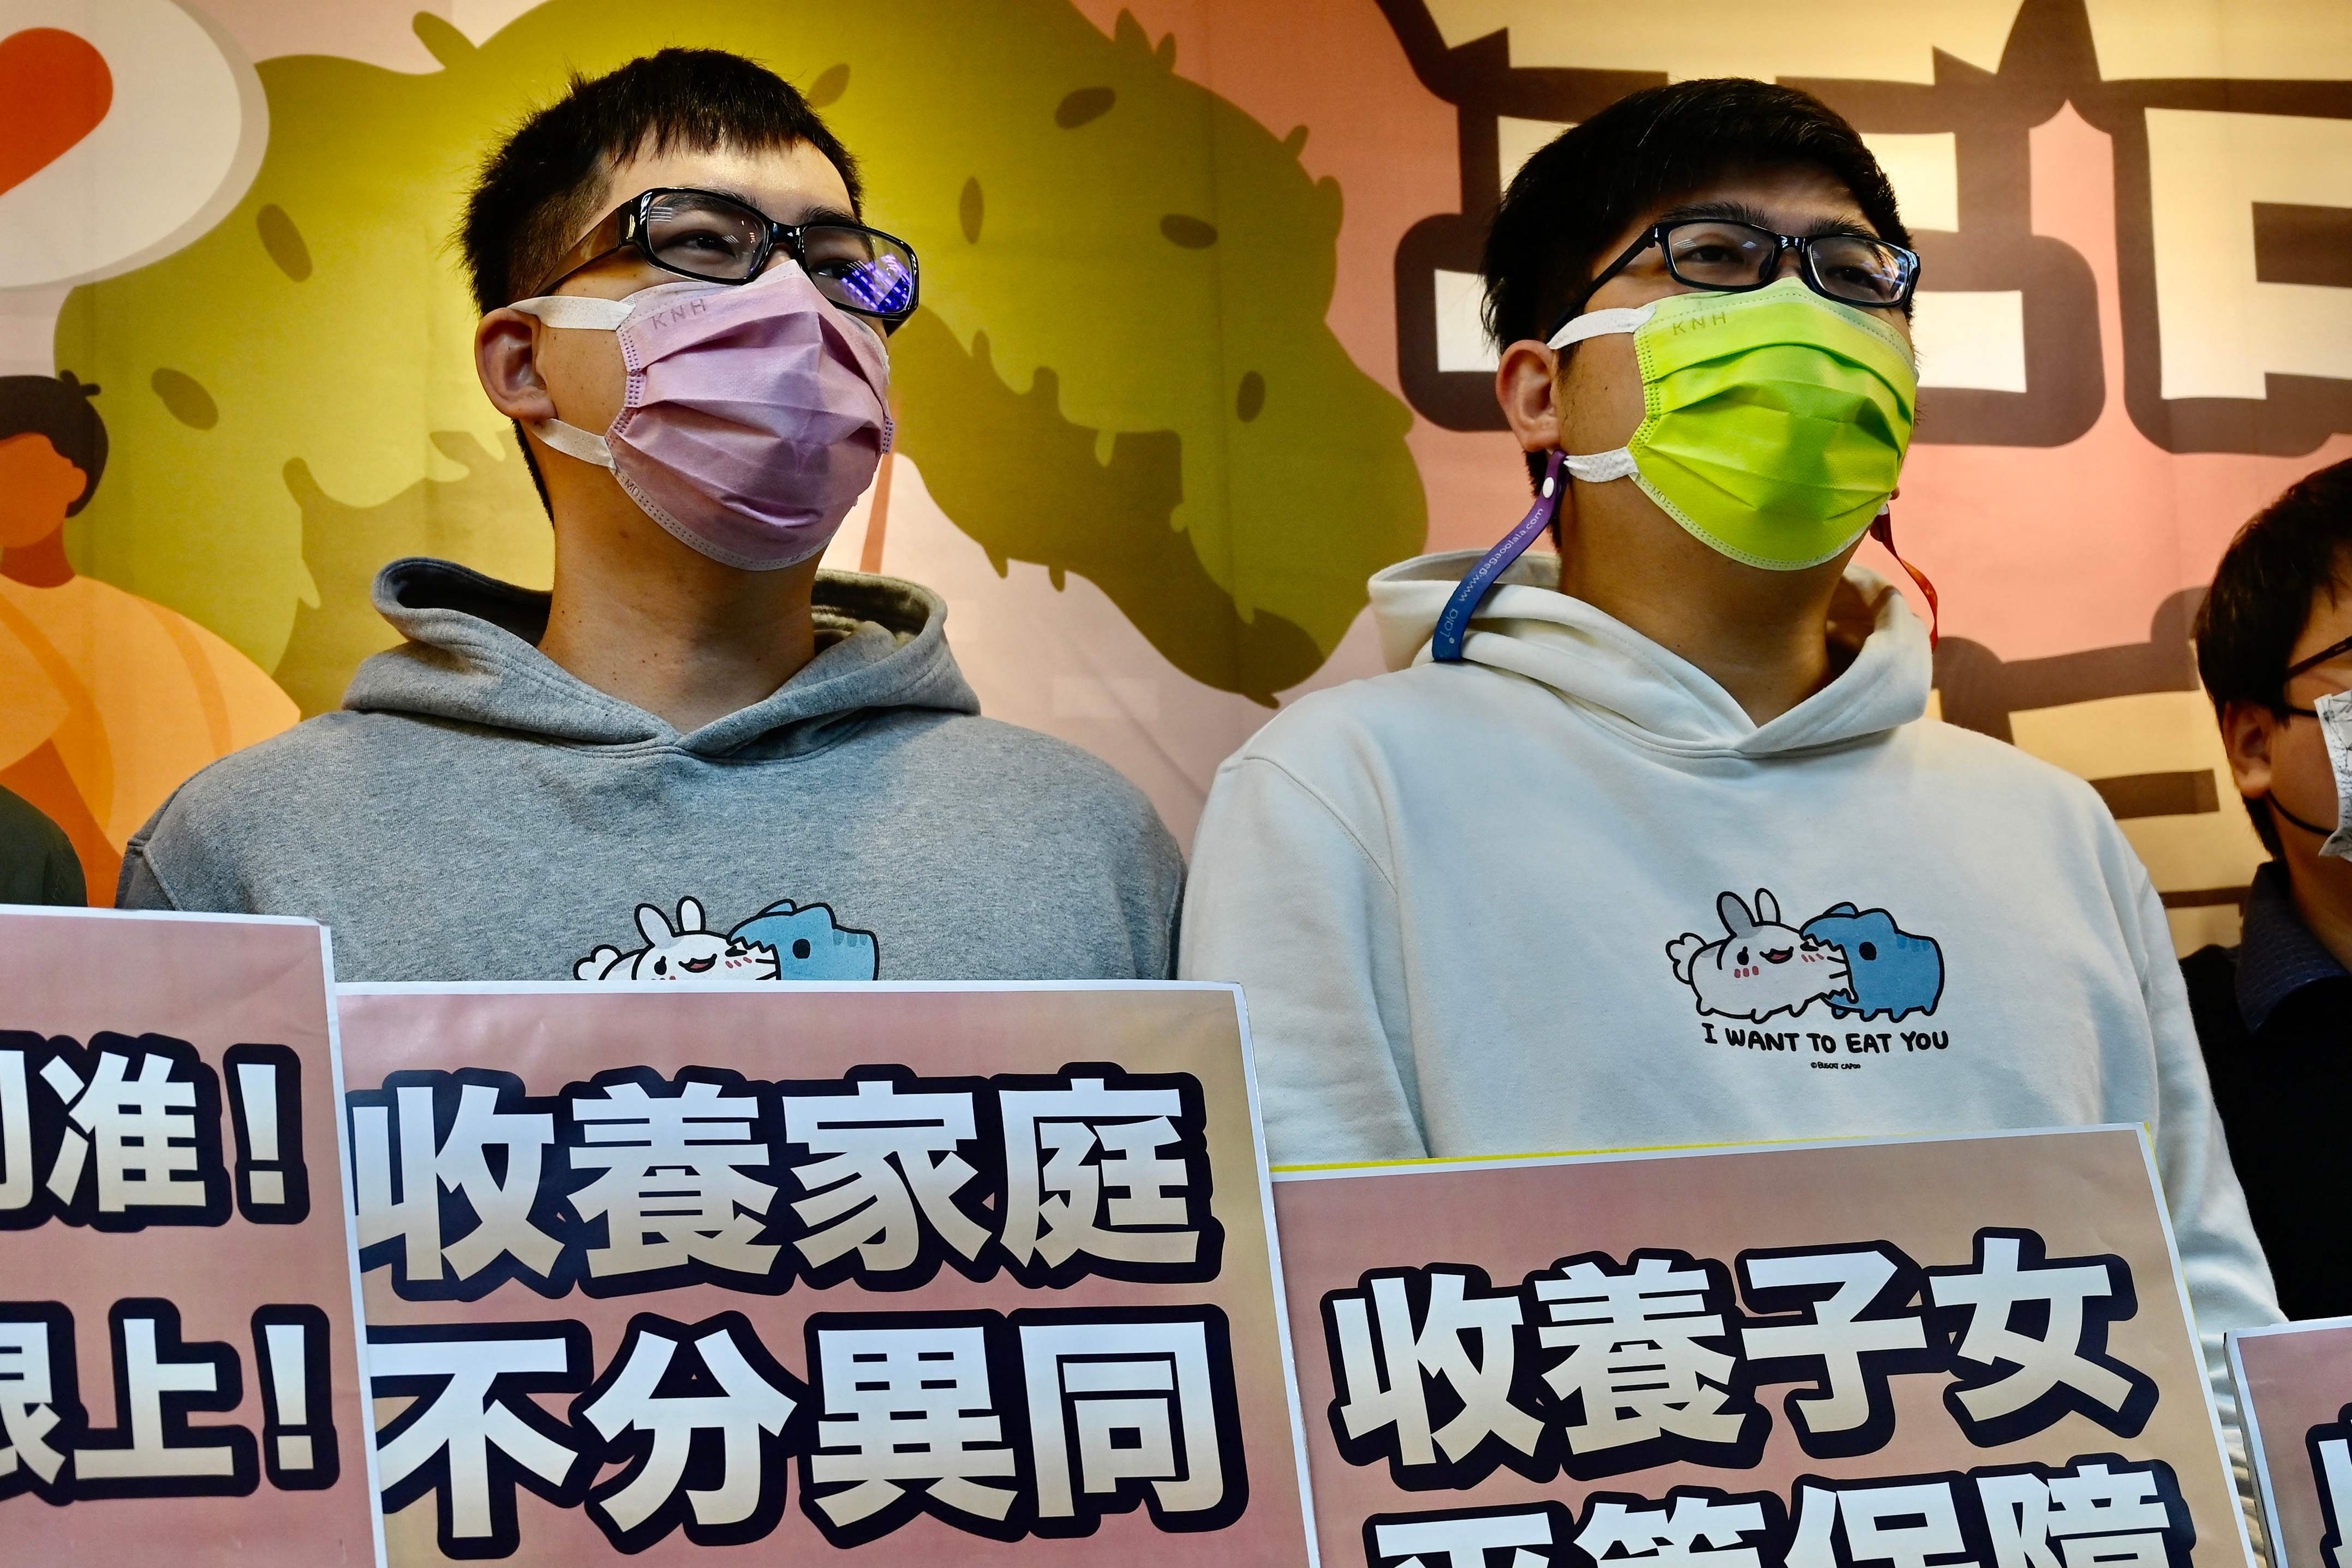 Taiwanese couple Chen Jun-ru (L) and Wang Chen-wei display signs seeking fair laws for adoption on 13 January, 2022